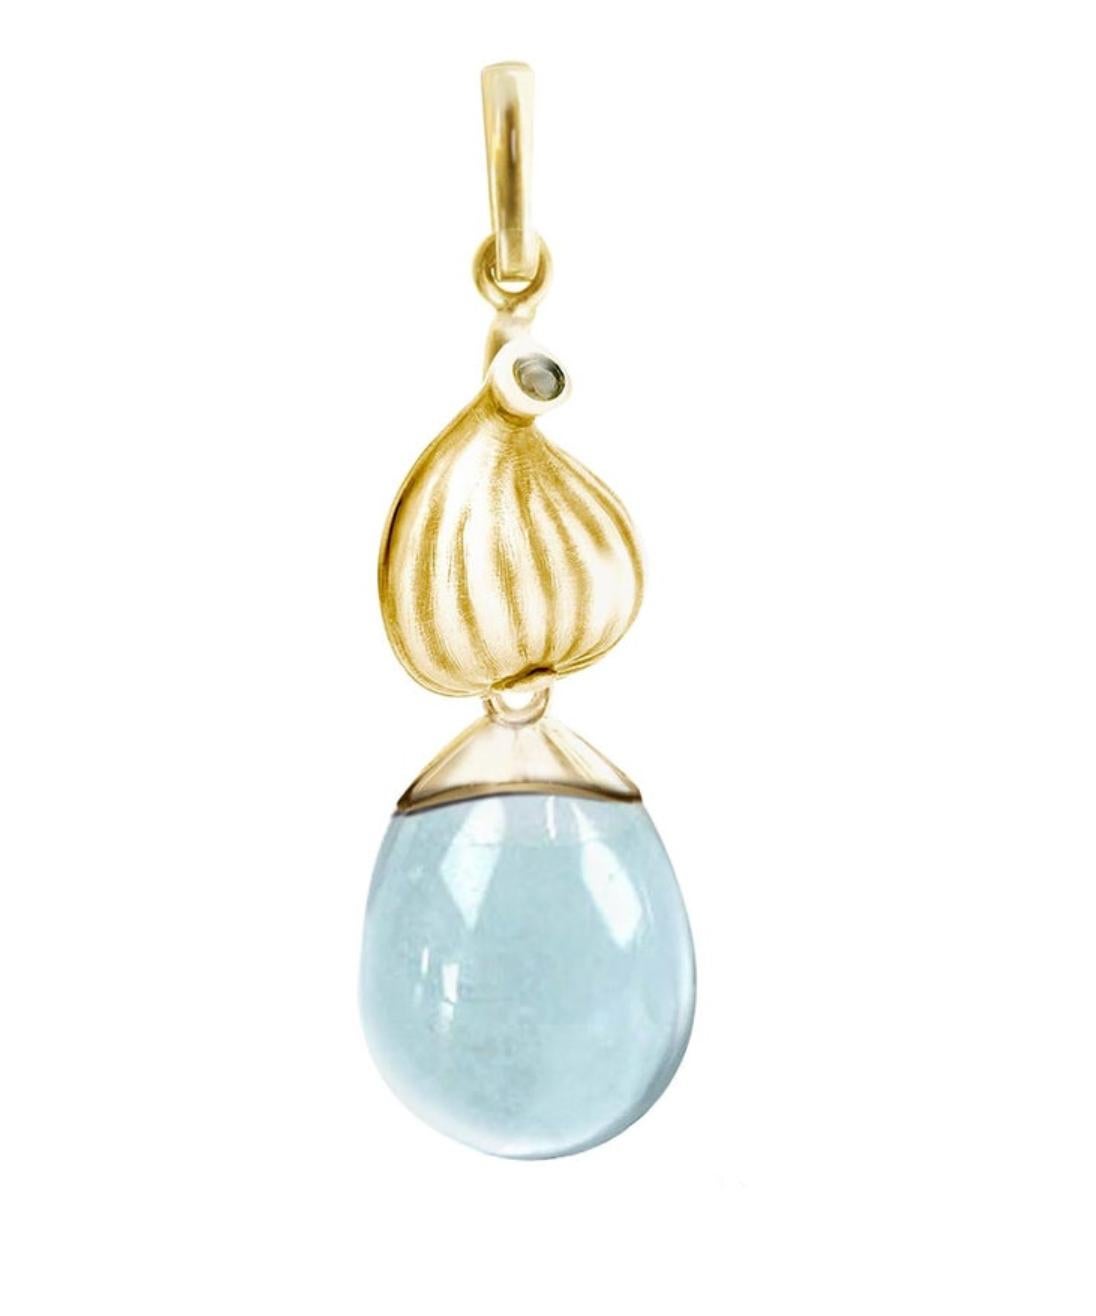 This 14 karat yellow gold Fig drop pendant necklace features a cabochon natural topaz gem that is open to light. The collection was previously featured in Vogue UA.

The artist, Polya Medvedeva, was inspired to create a jewelry collection featuring